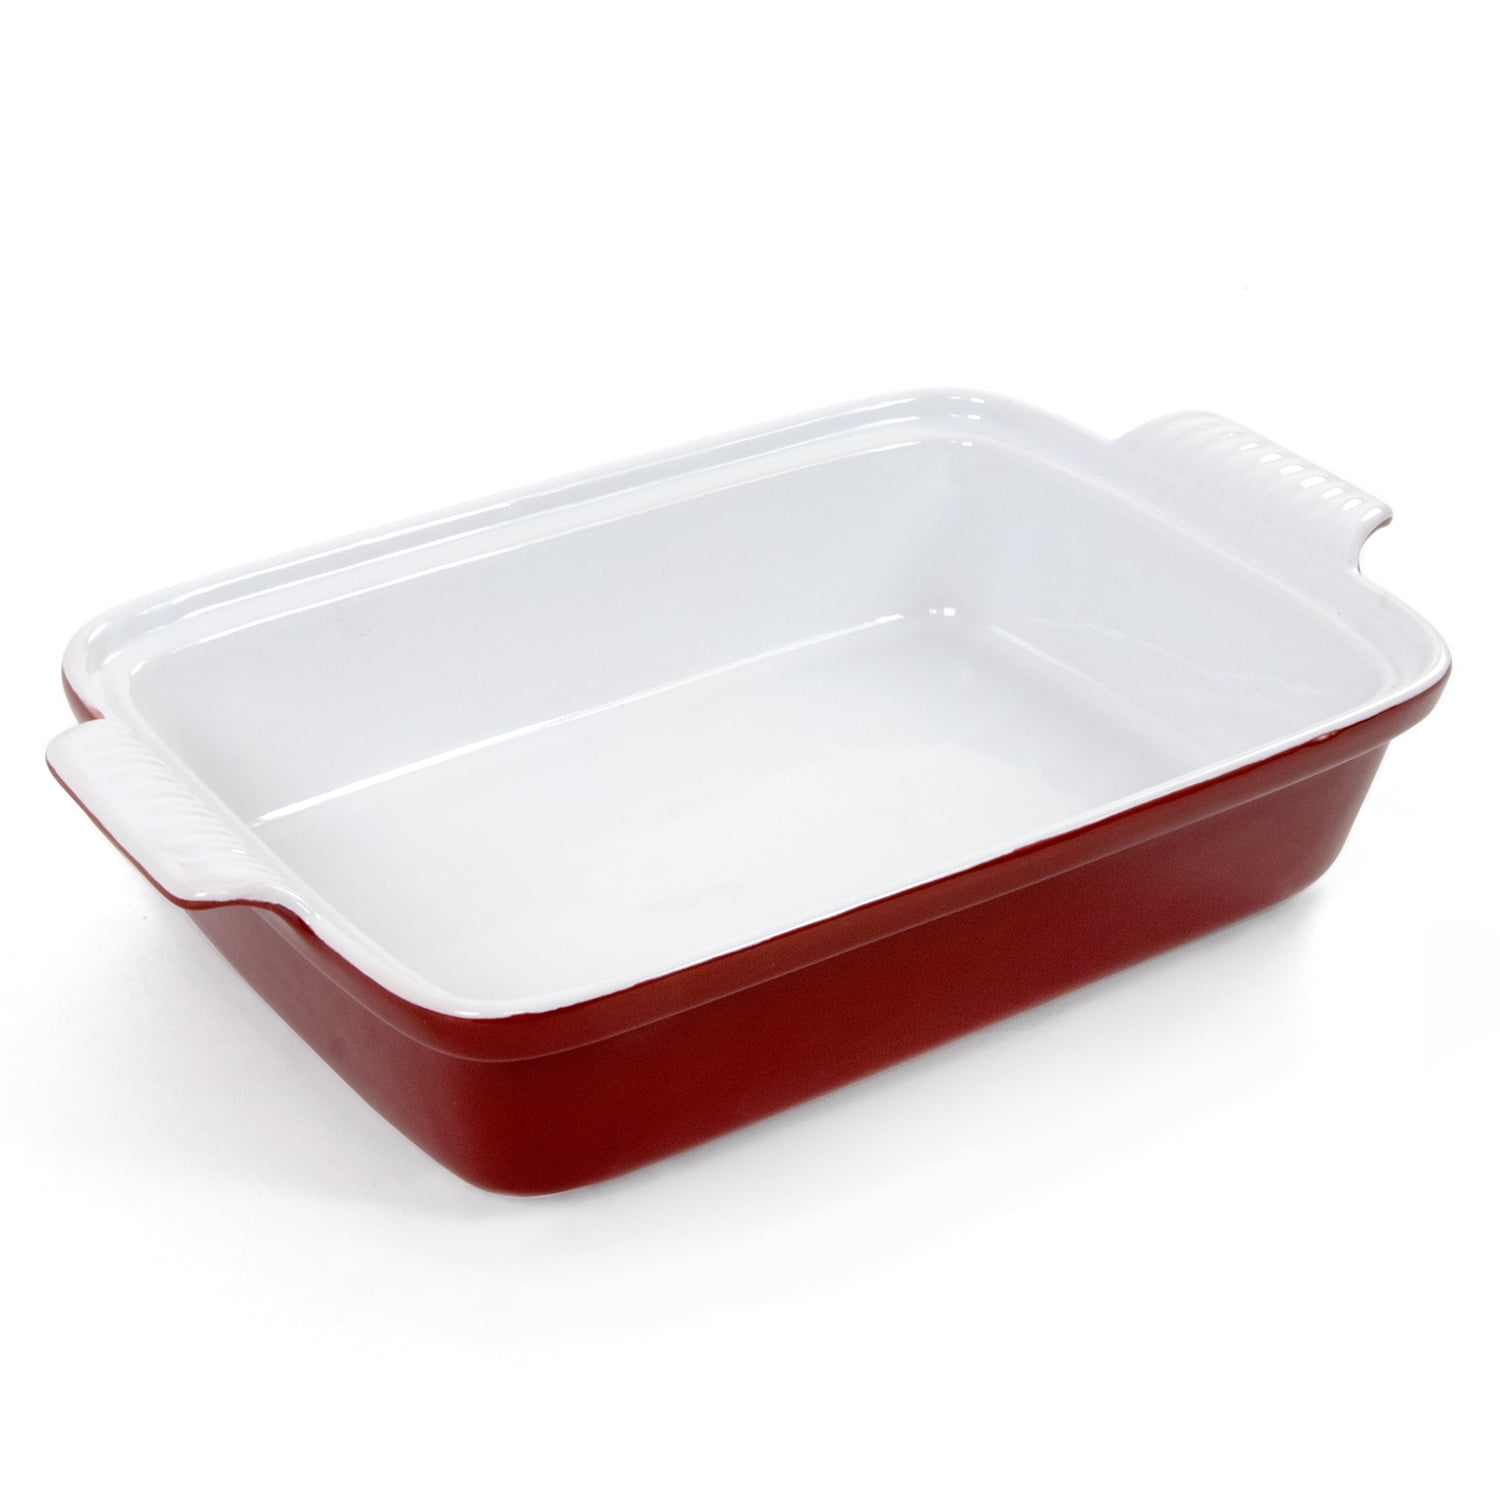 Hell's Kitchen Cookware Oval Covered Casserole; 3.5 Quart, Brand New